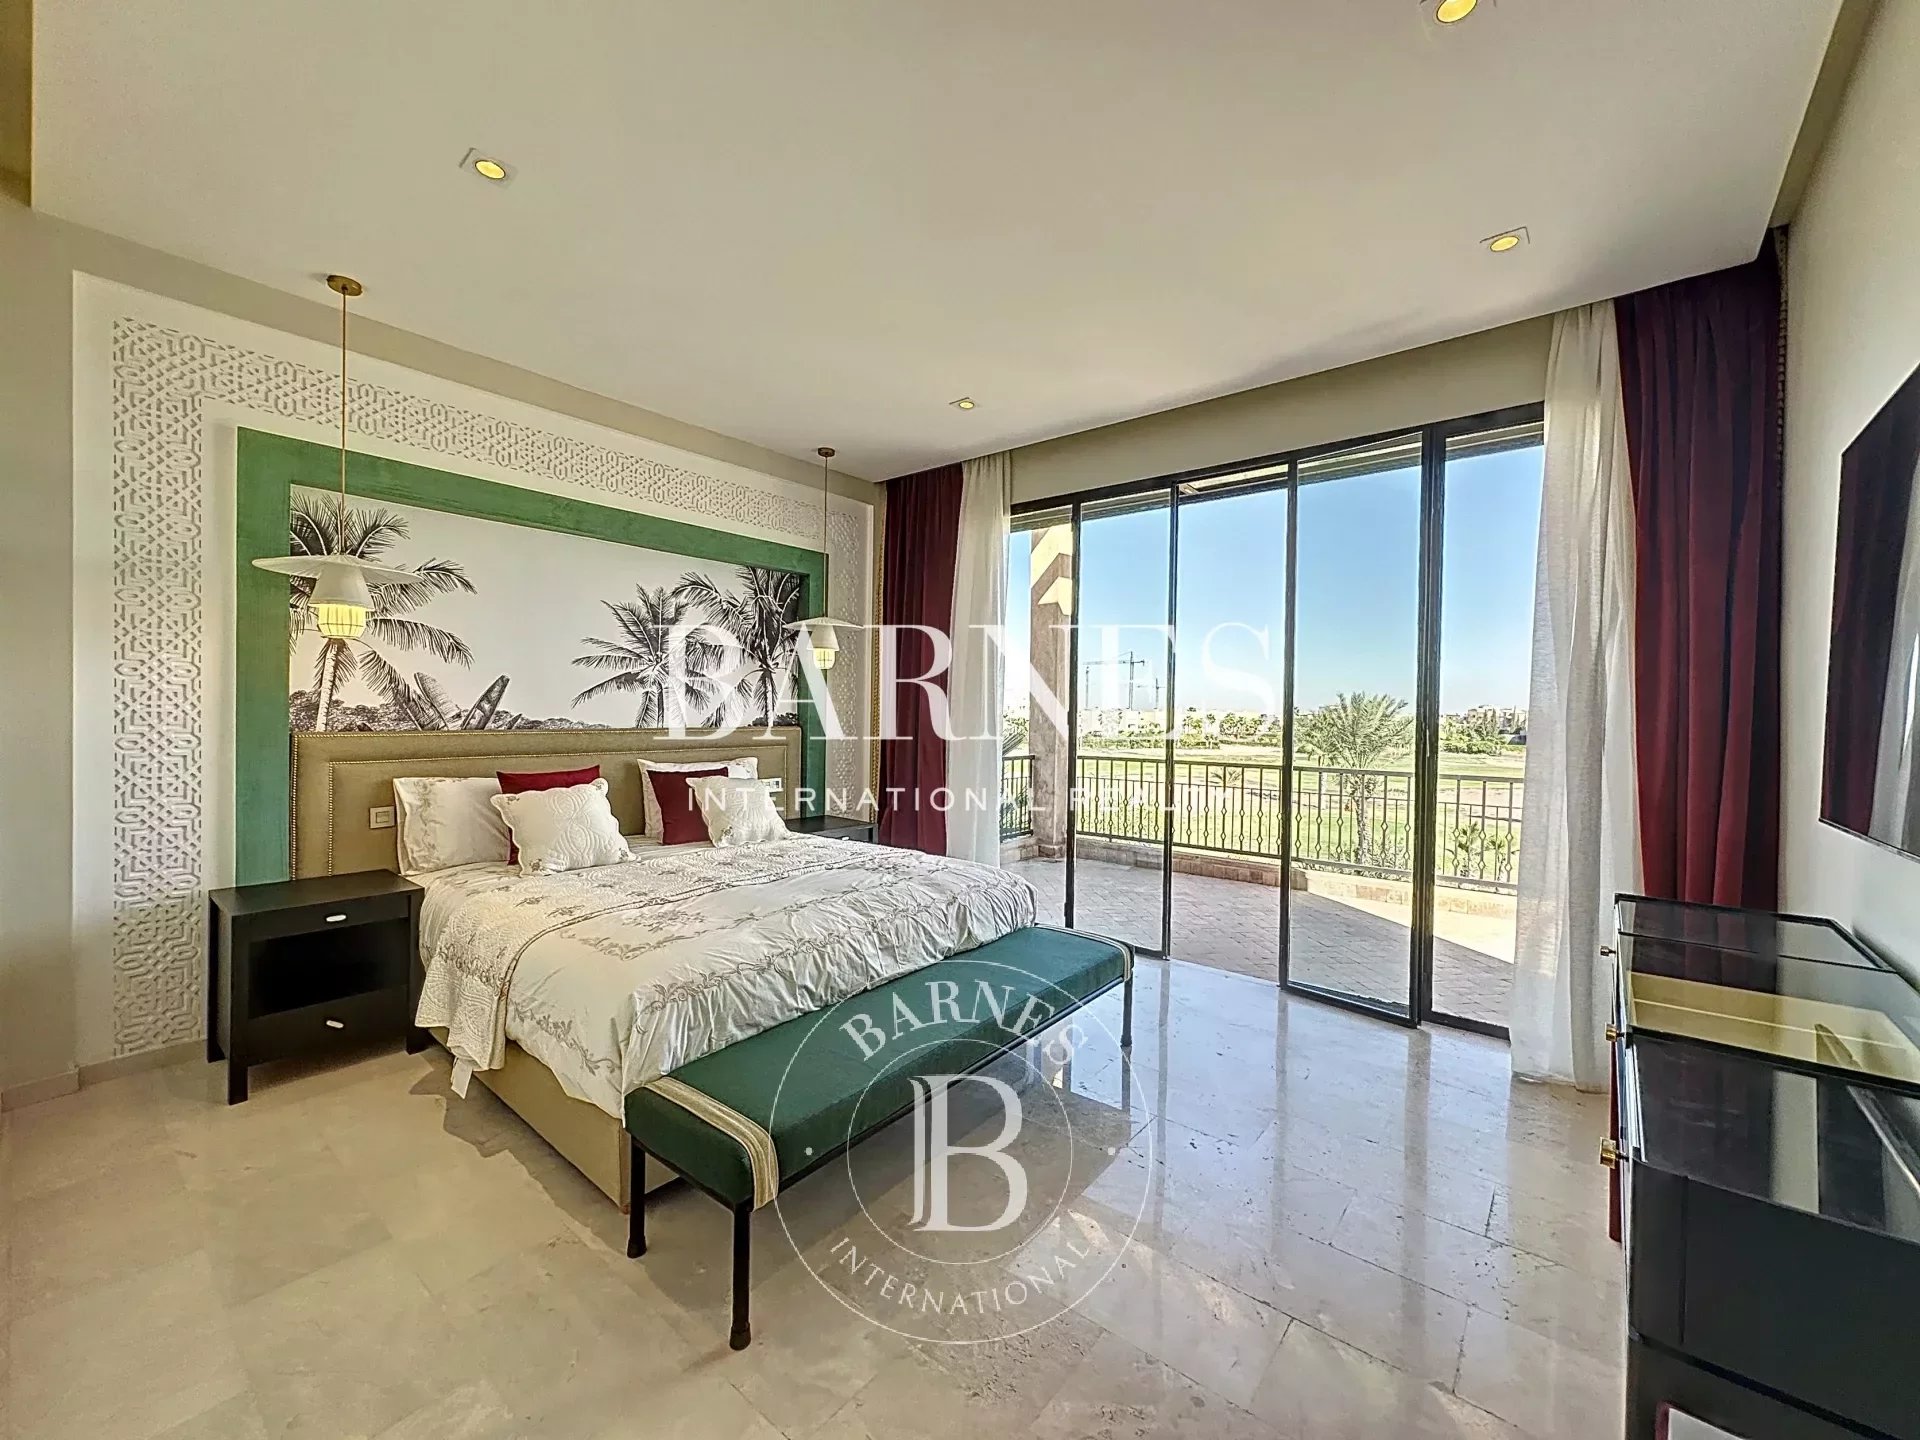 4-suite villa with a refined Moroccan style, located directly on the golf course. - picture 16 title=